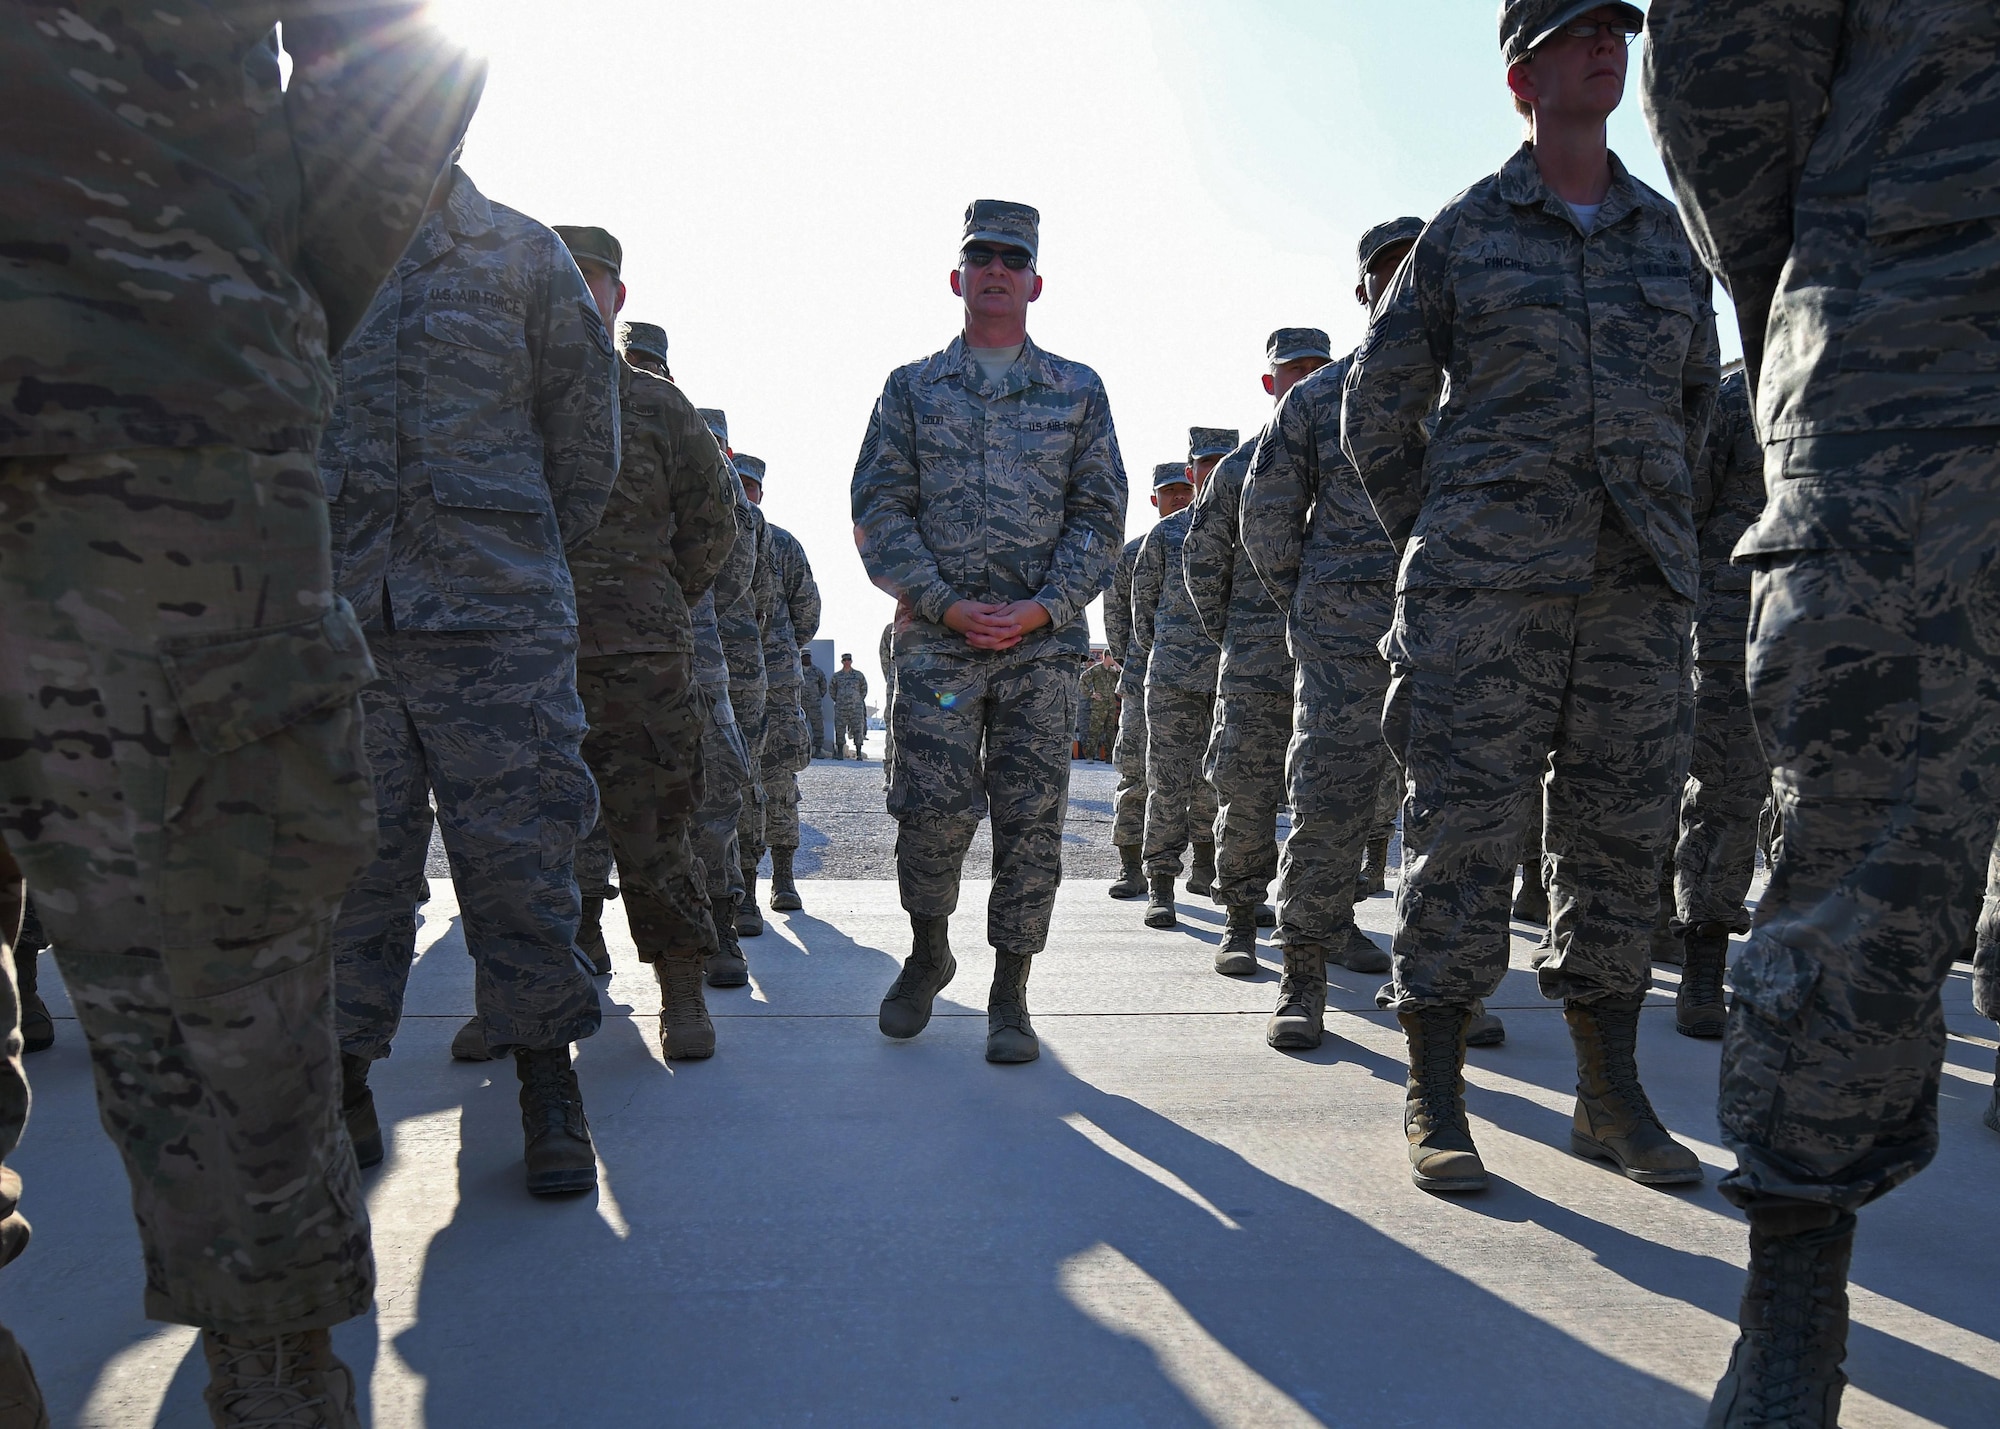 U.S. Air Force Chief Master Sgt. Thomas F. Good, 379th Air Expeditionary Wing command chief, speaks to Airmen in formation at Al Udeid Air Base, Qatar, Nov. 11, 2016. The Airmen stood in formation prior to a Veterans Day retreat ceremony, during which they retired the colors to honor all those who served and currently serve in the U.S. armed forces. (U.S. Air Force photo by Senior Airman Miles Wilson)